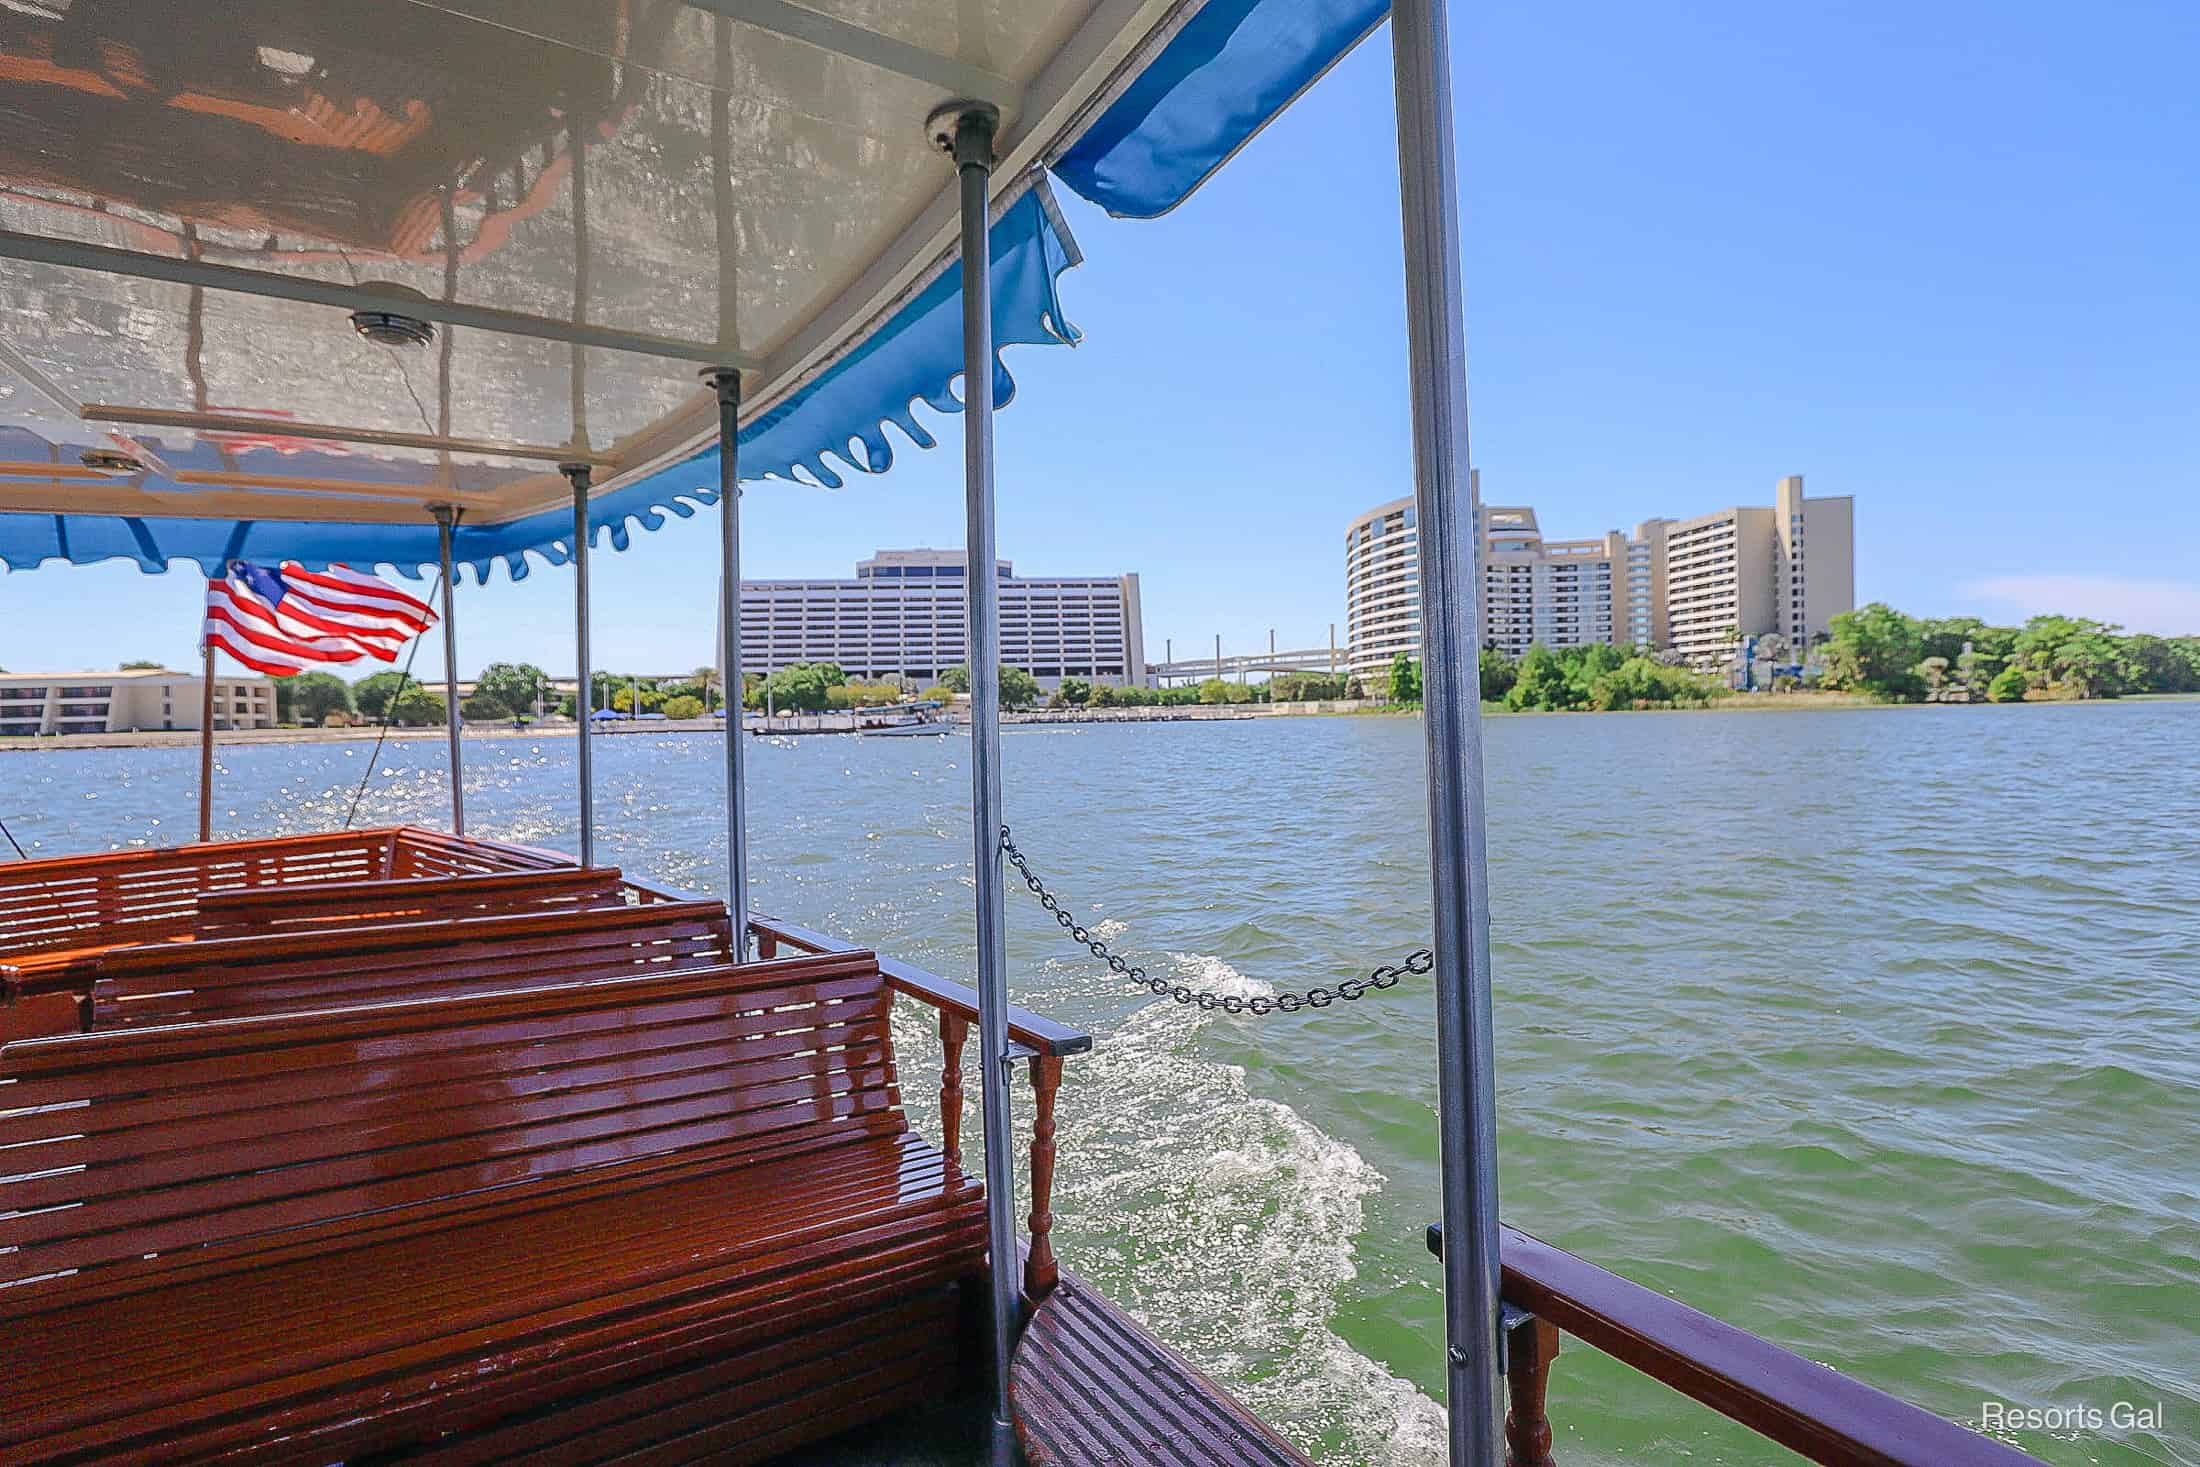 a view of the Contemporary and Bay Lake Tower from a boat on Bay Lake 